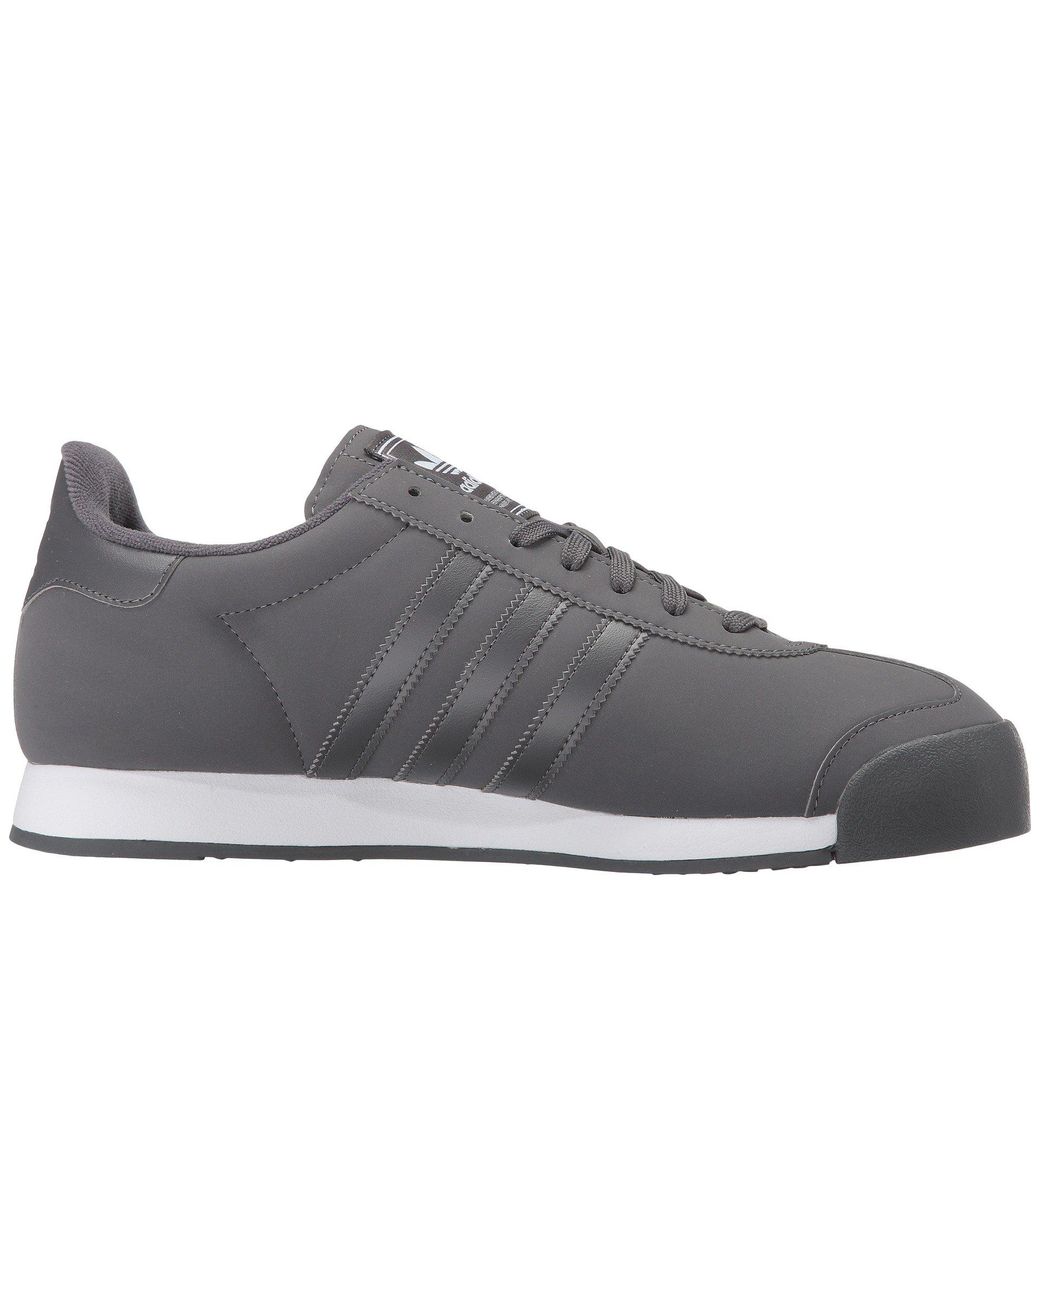 adidas Originals Samoa Leather in Grey 5/White/Gold (Gray) for Men | Lyst